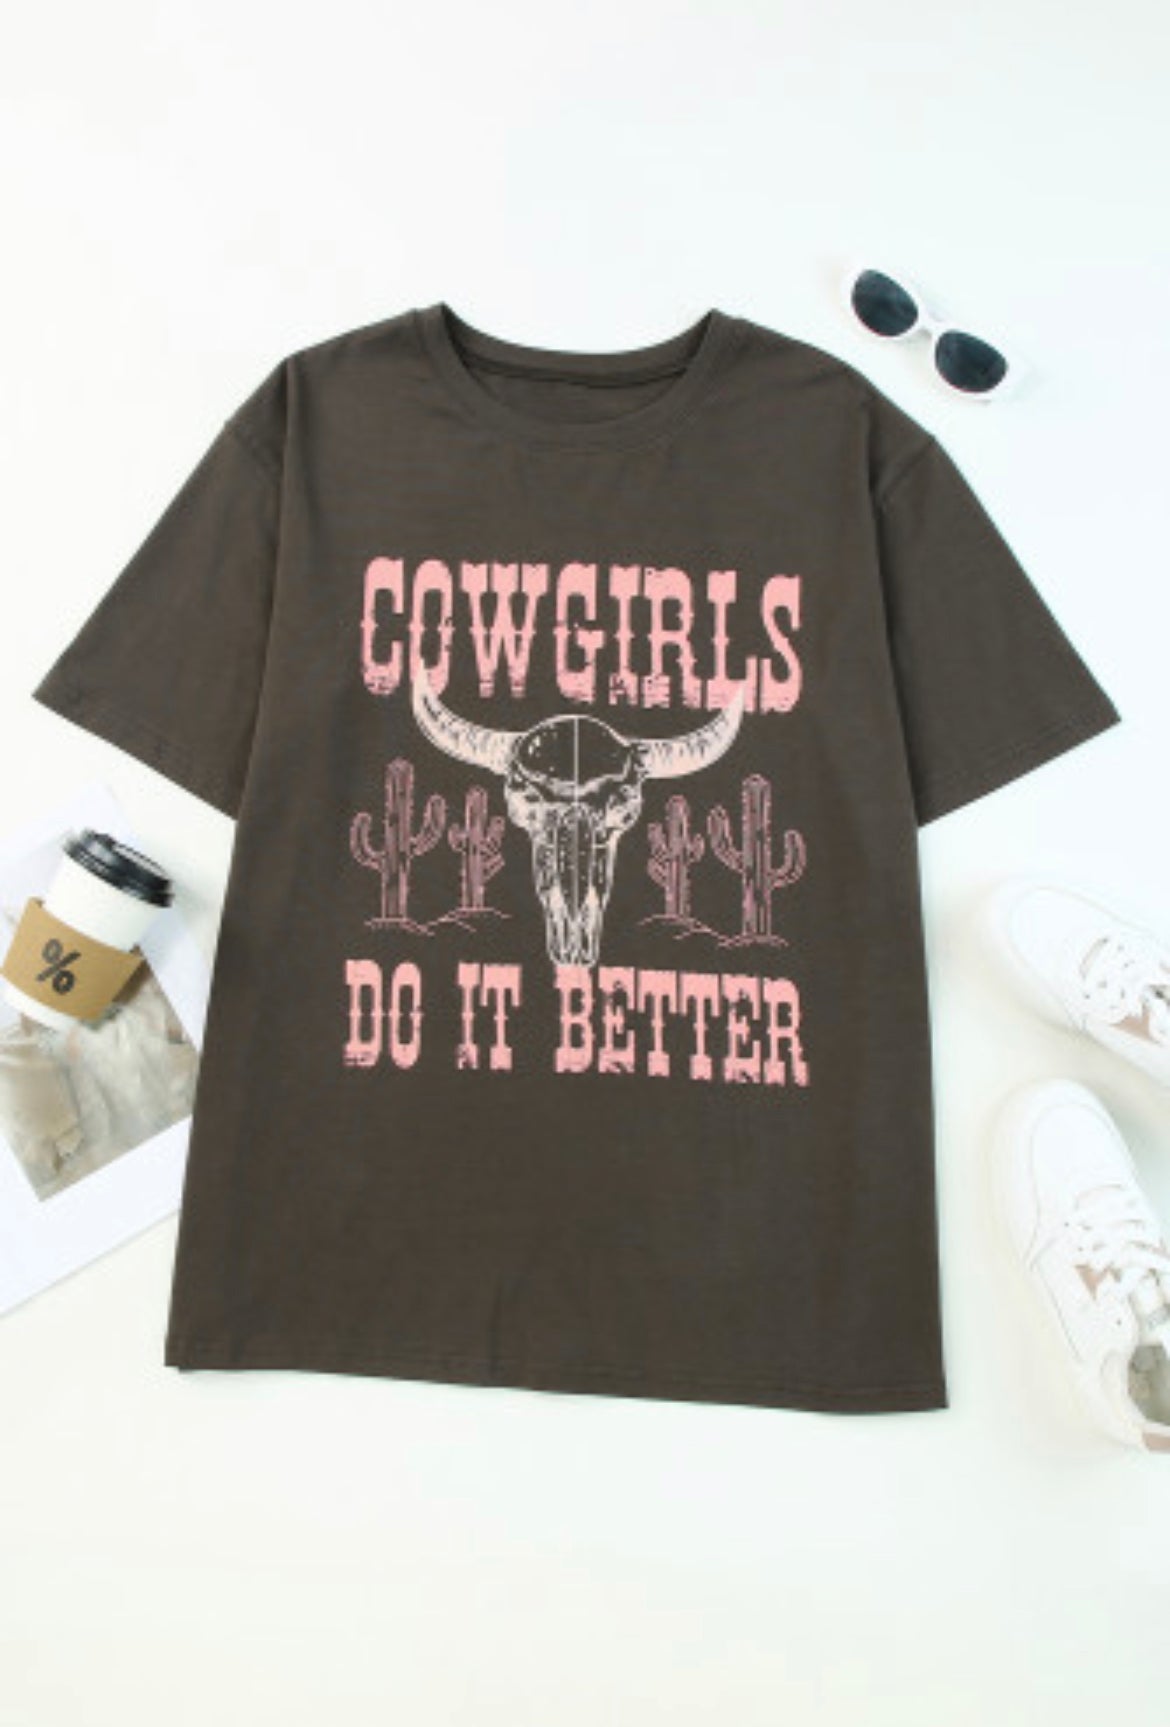 Cowgirls Graphic T Shirt-Western Culture Leather